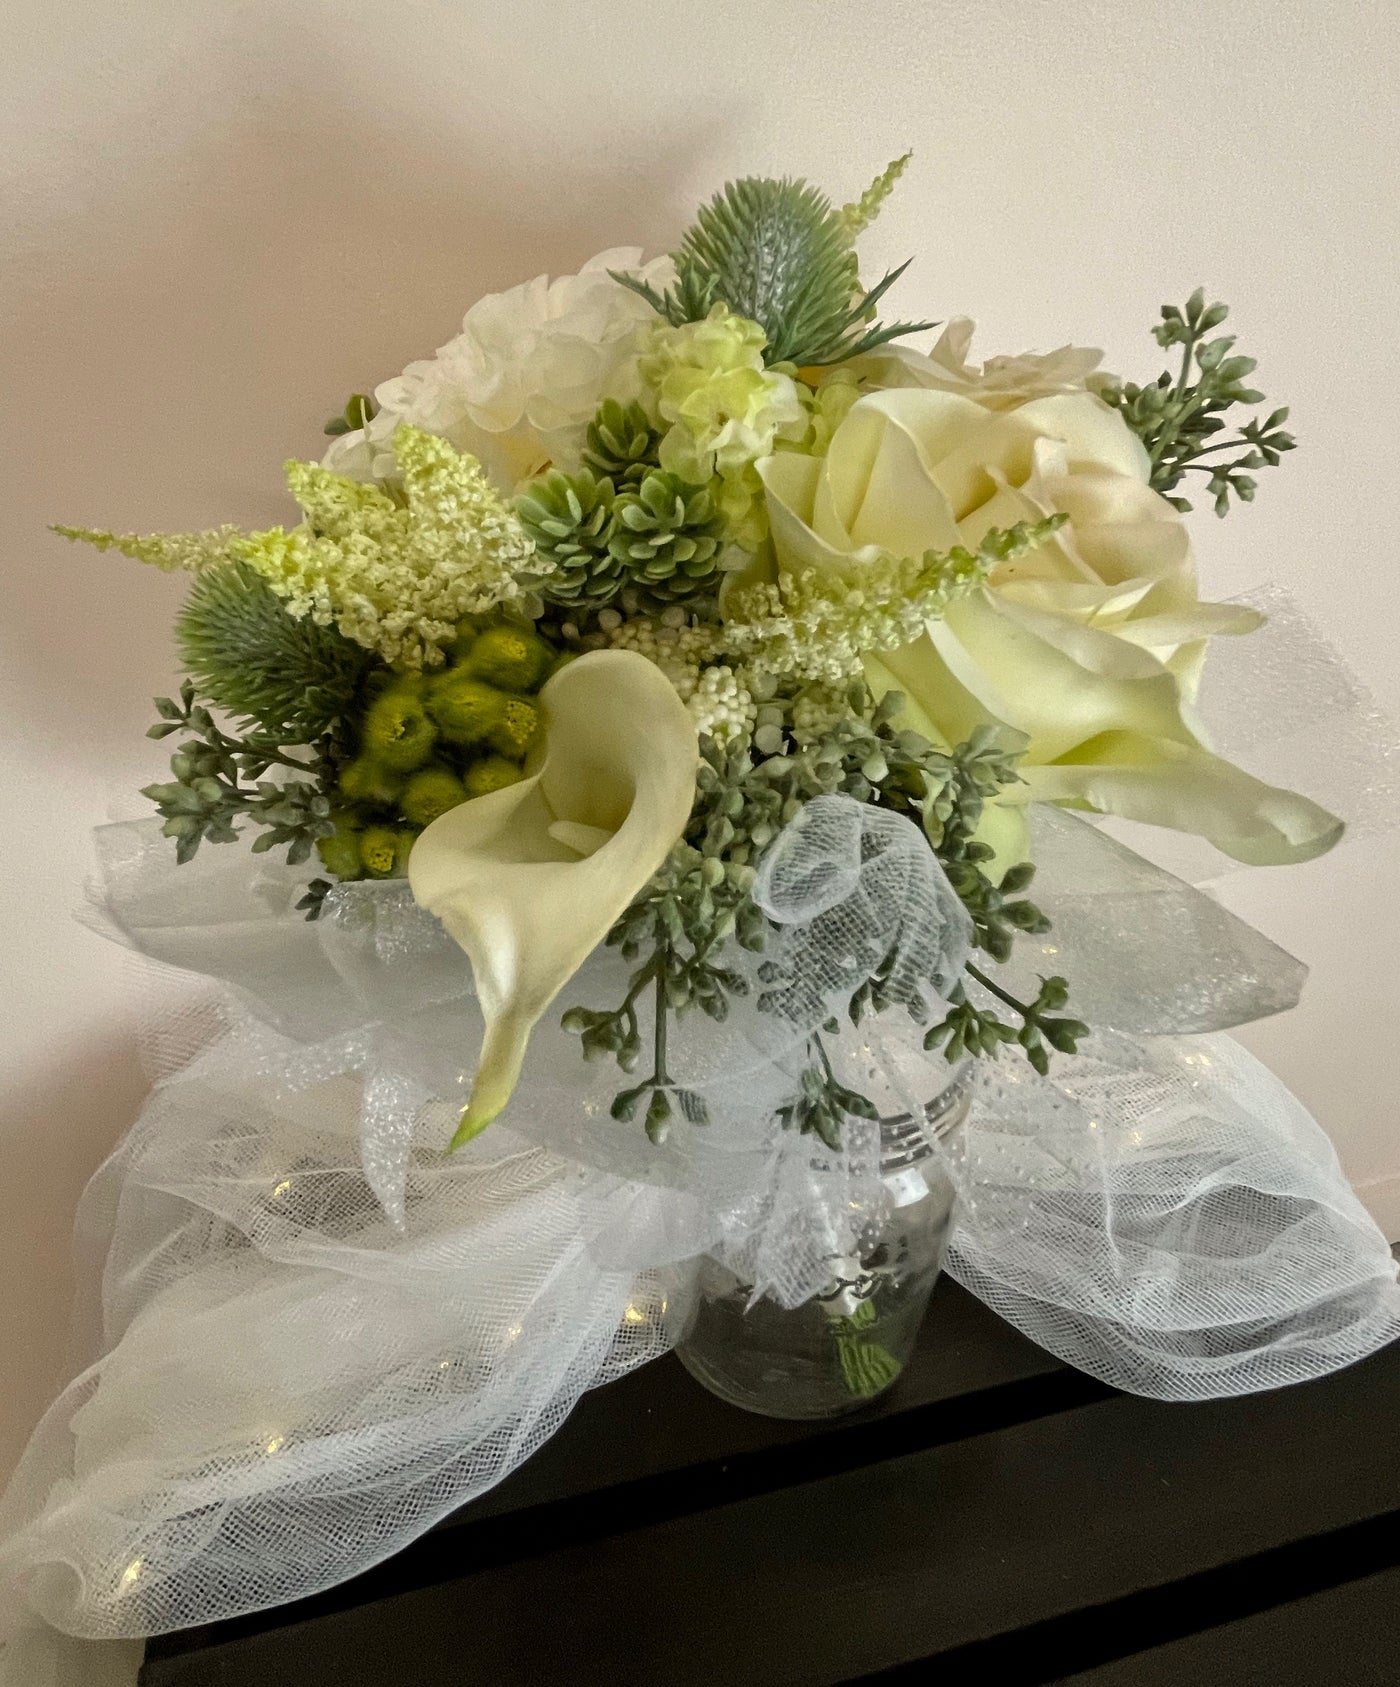 Flower Girl Bouquet in white and light green. Rents for $35.00 for five days